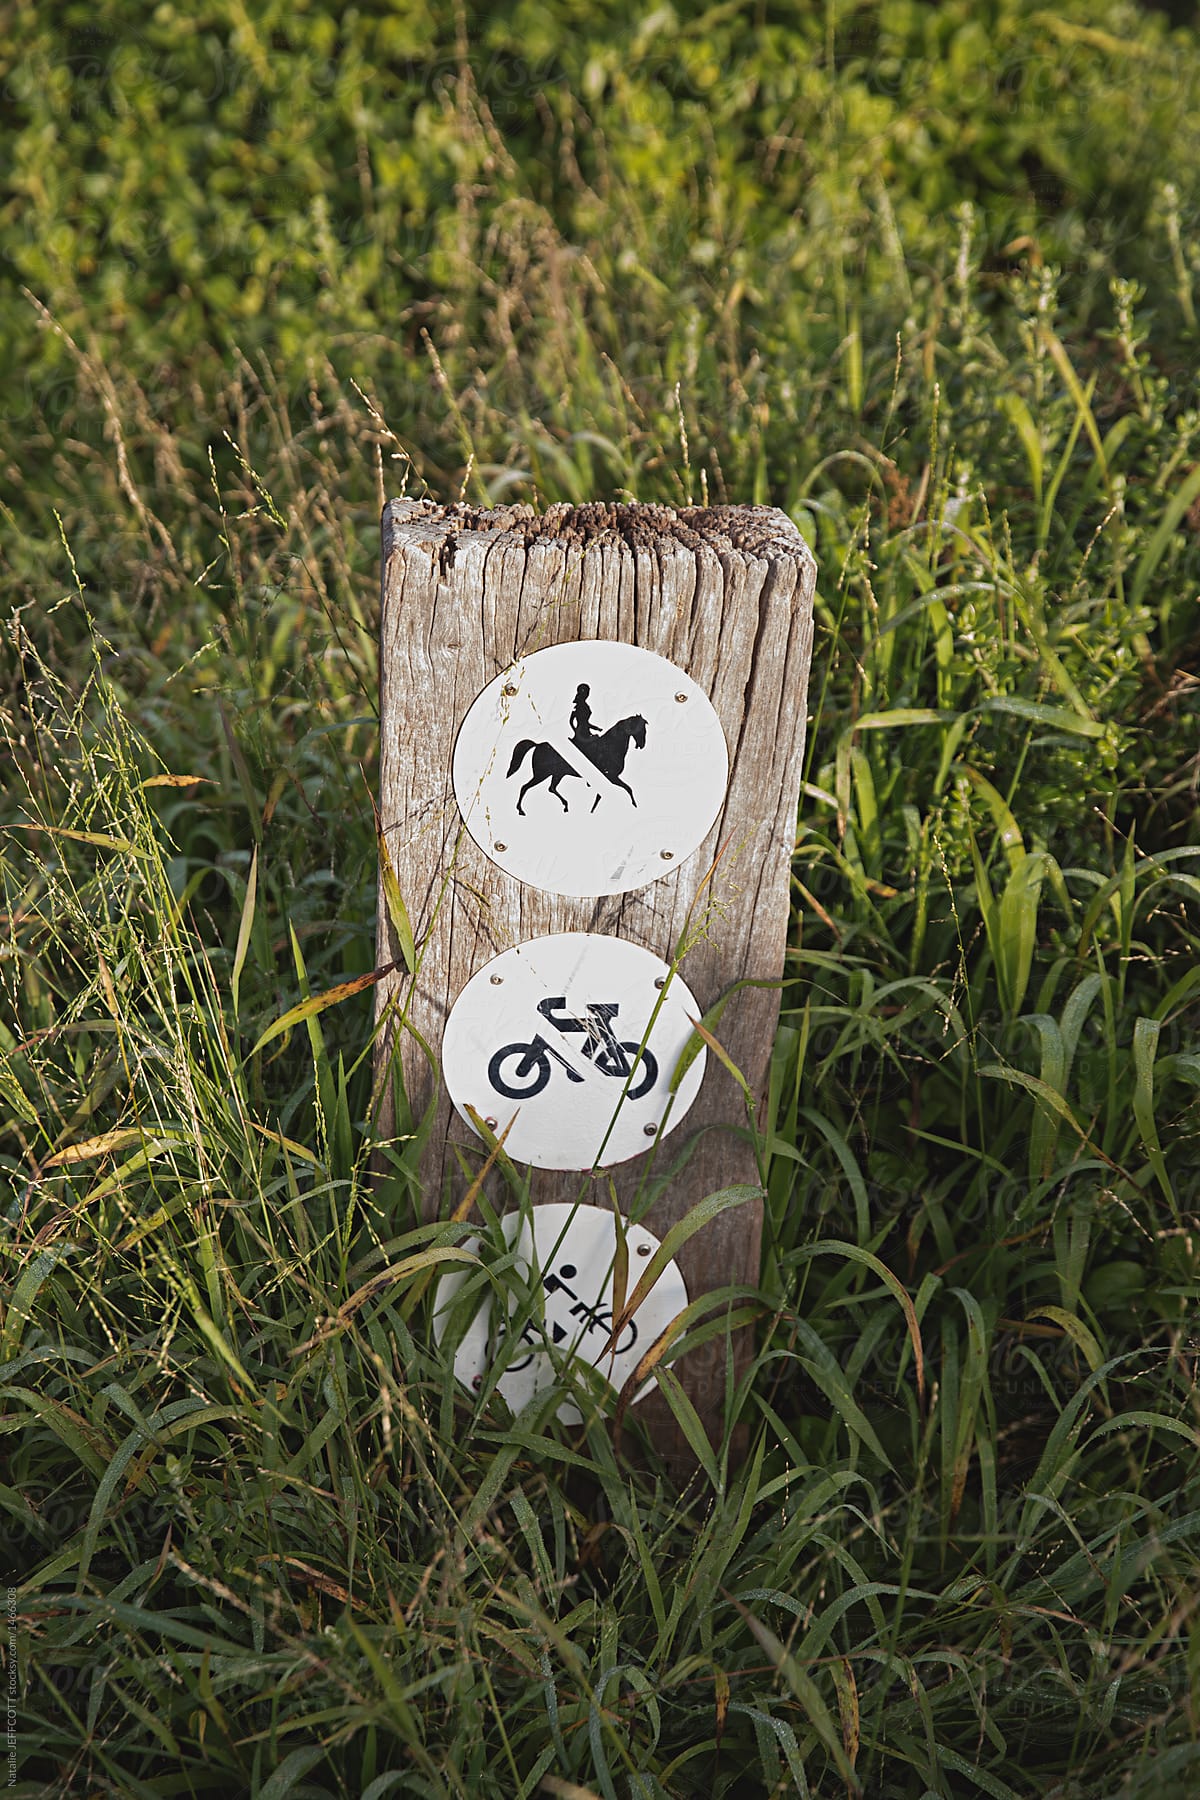 sign in long grass along a path - no horses, bicycles and dirt bikes